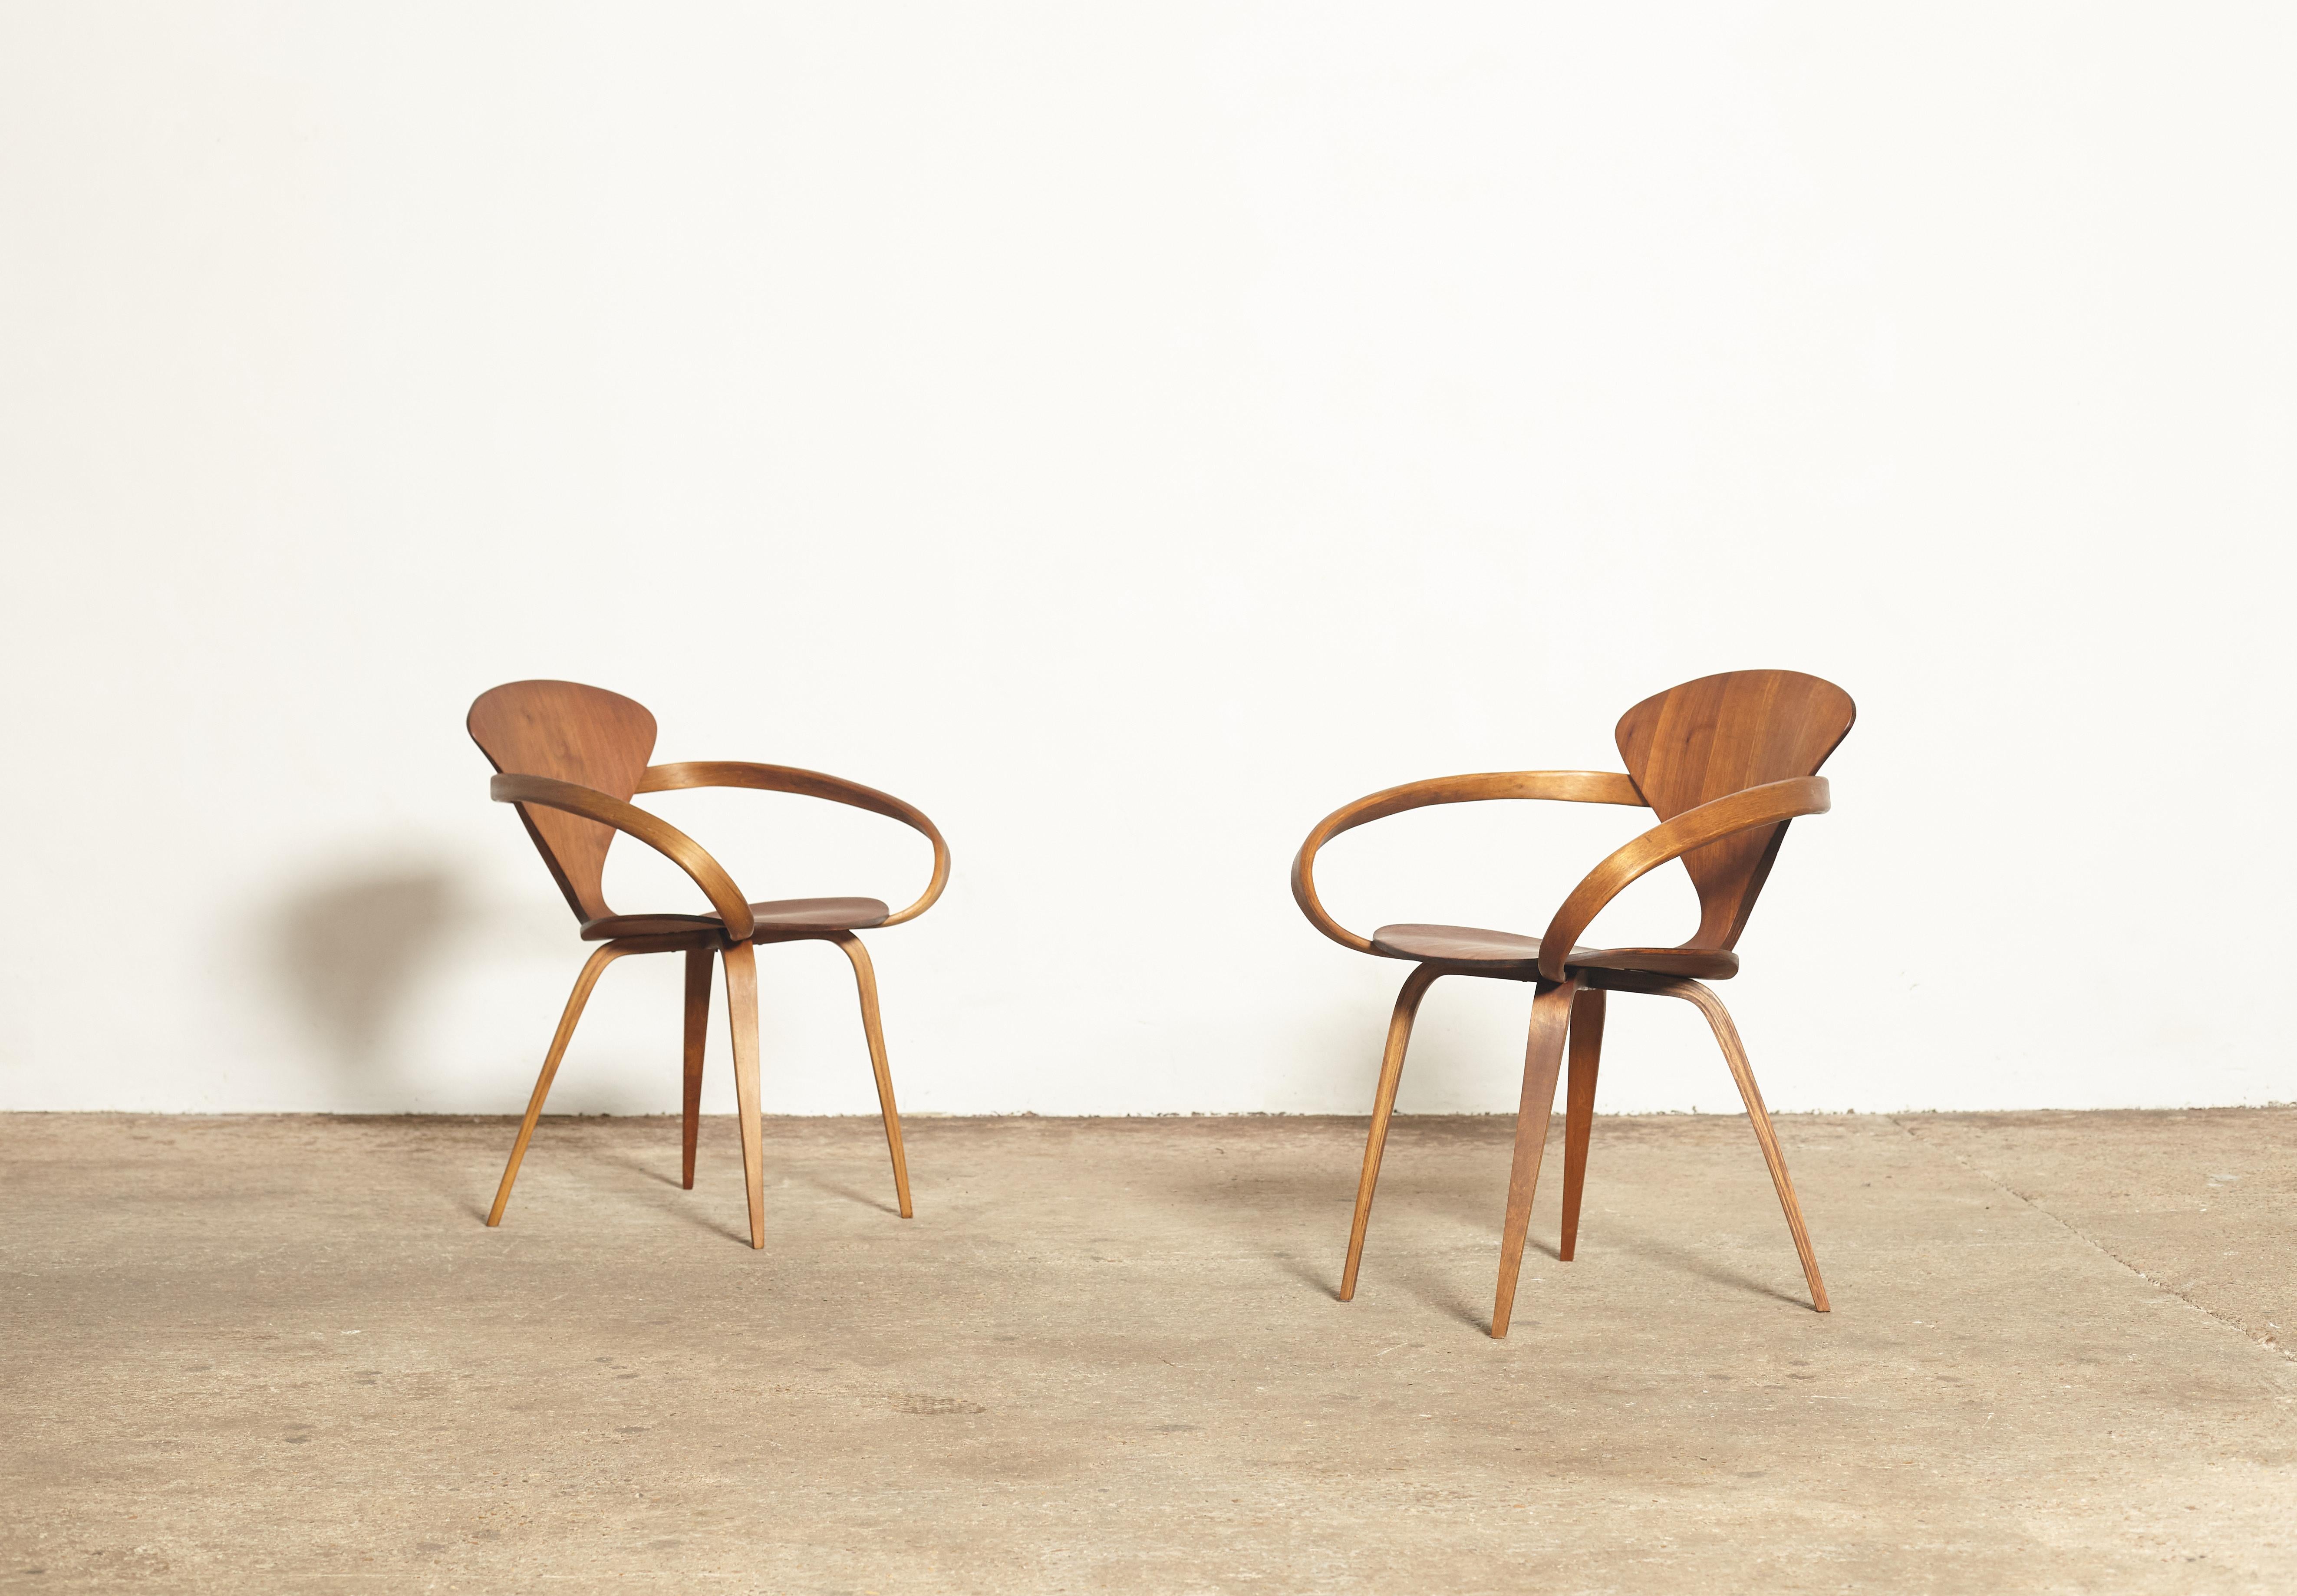 20th Century Set of Four Norman Cherner Dining Chairs, Made by Plycraft, USA, 1960s